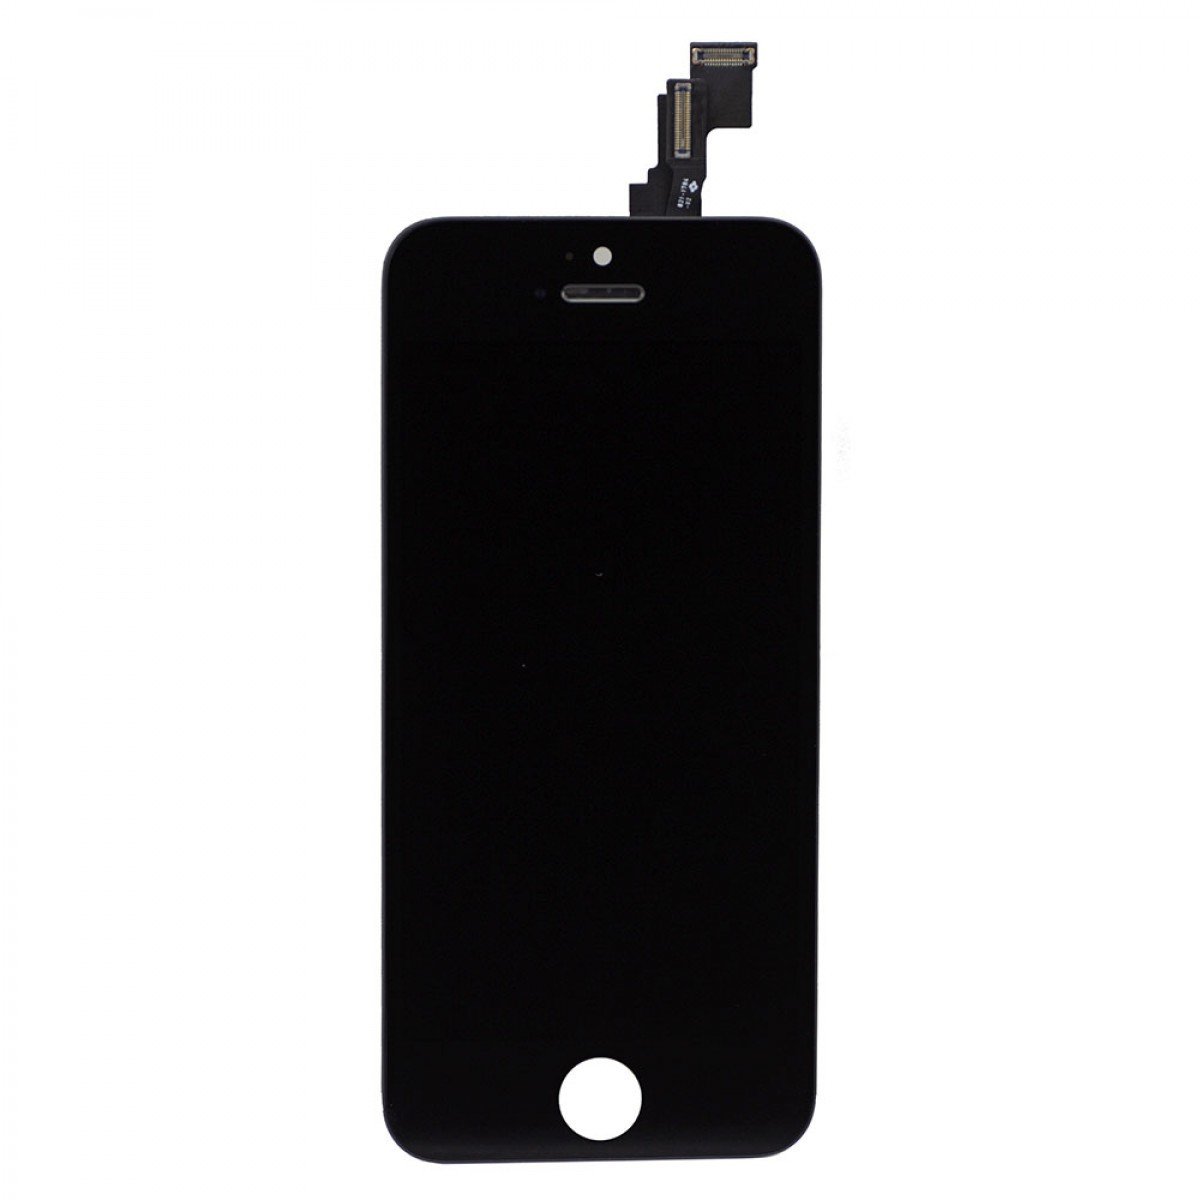 iPhone 5C Screen Replacement